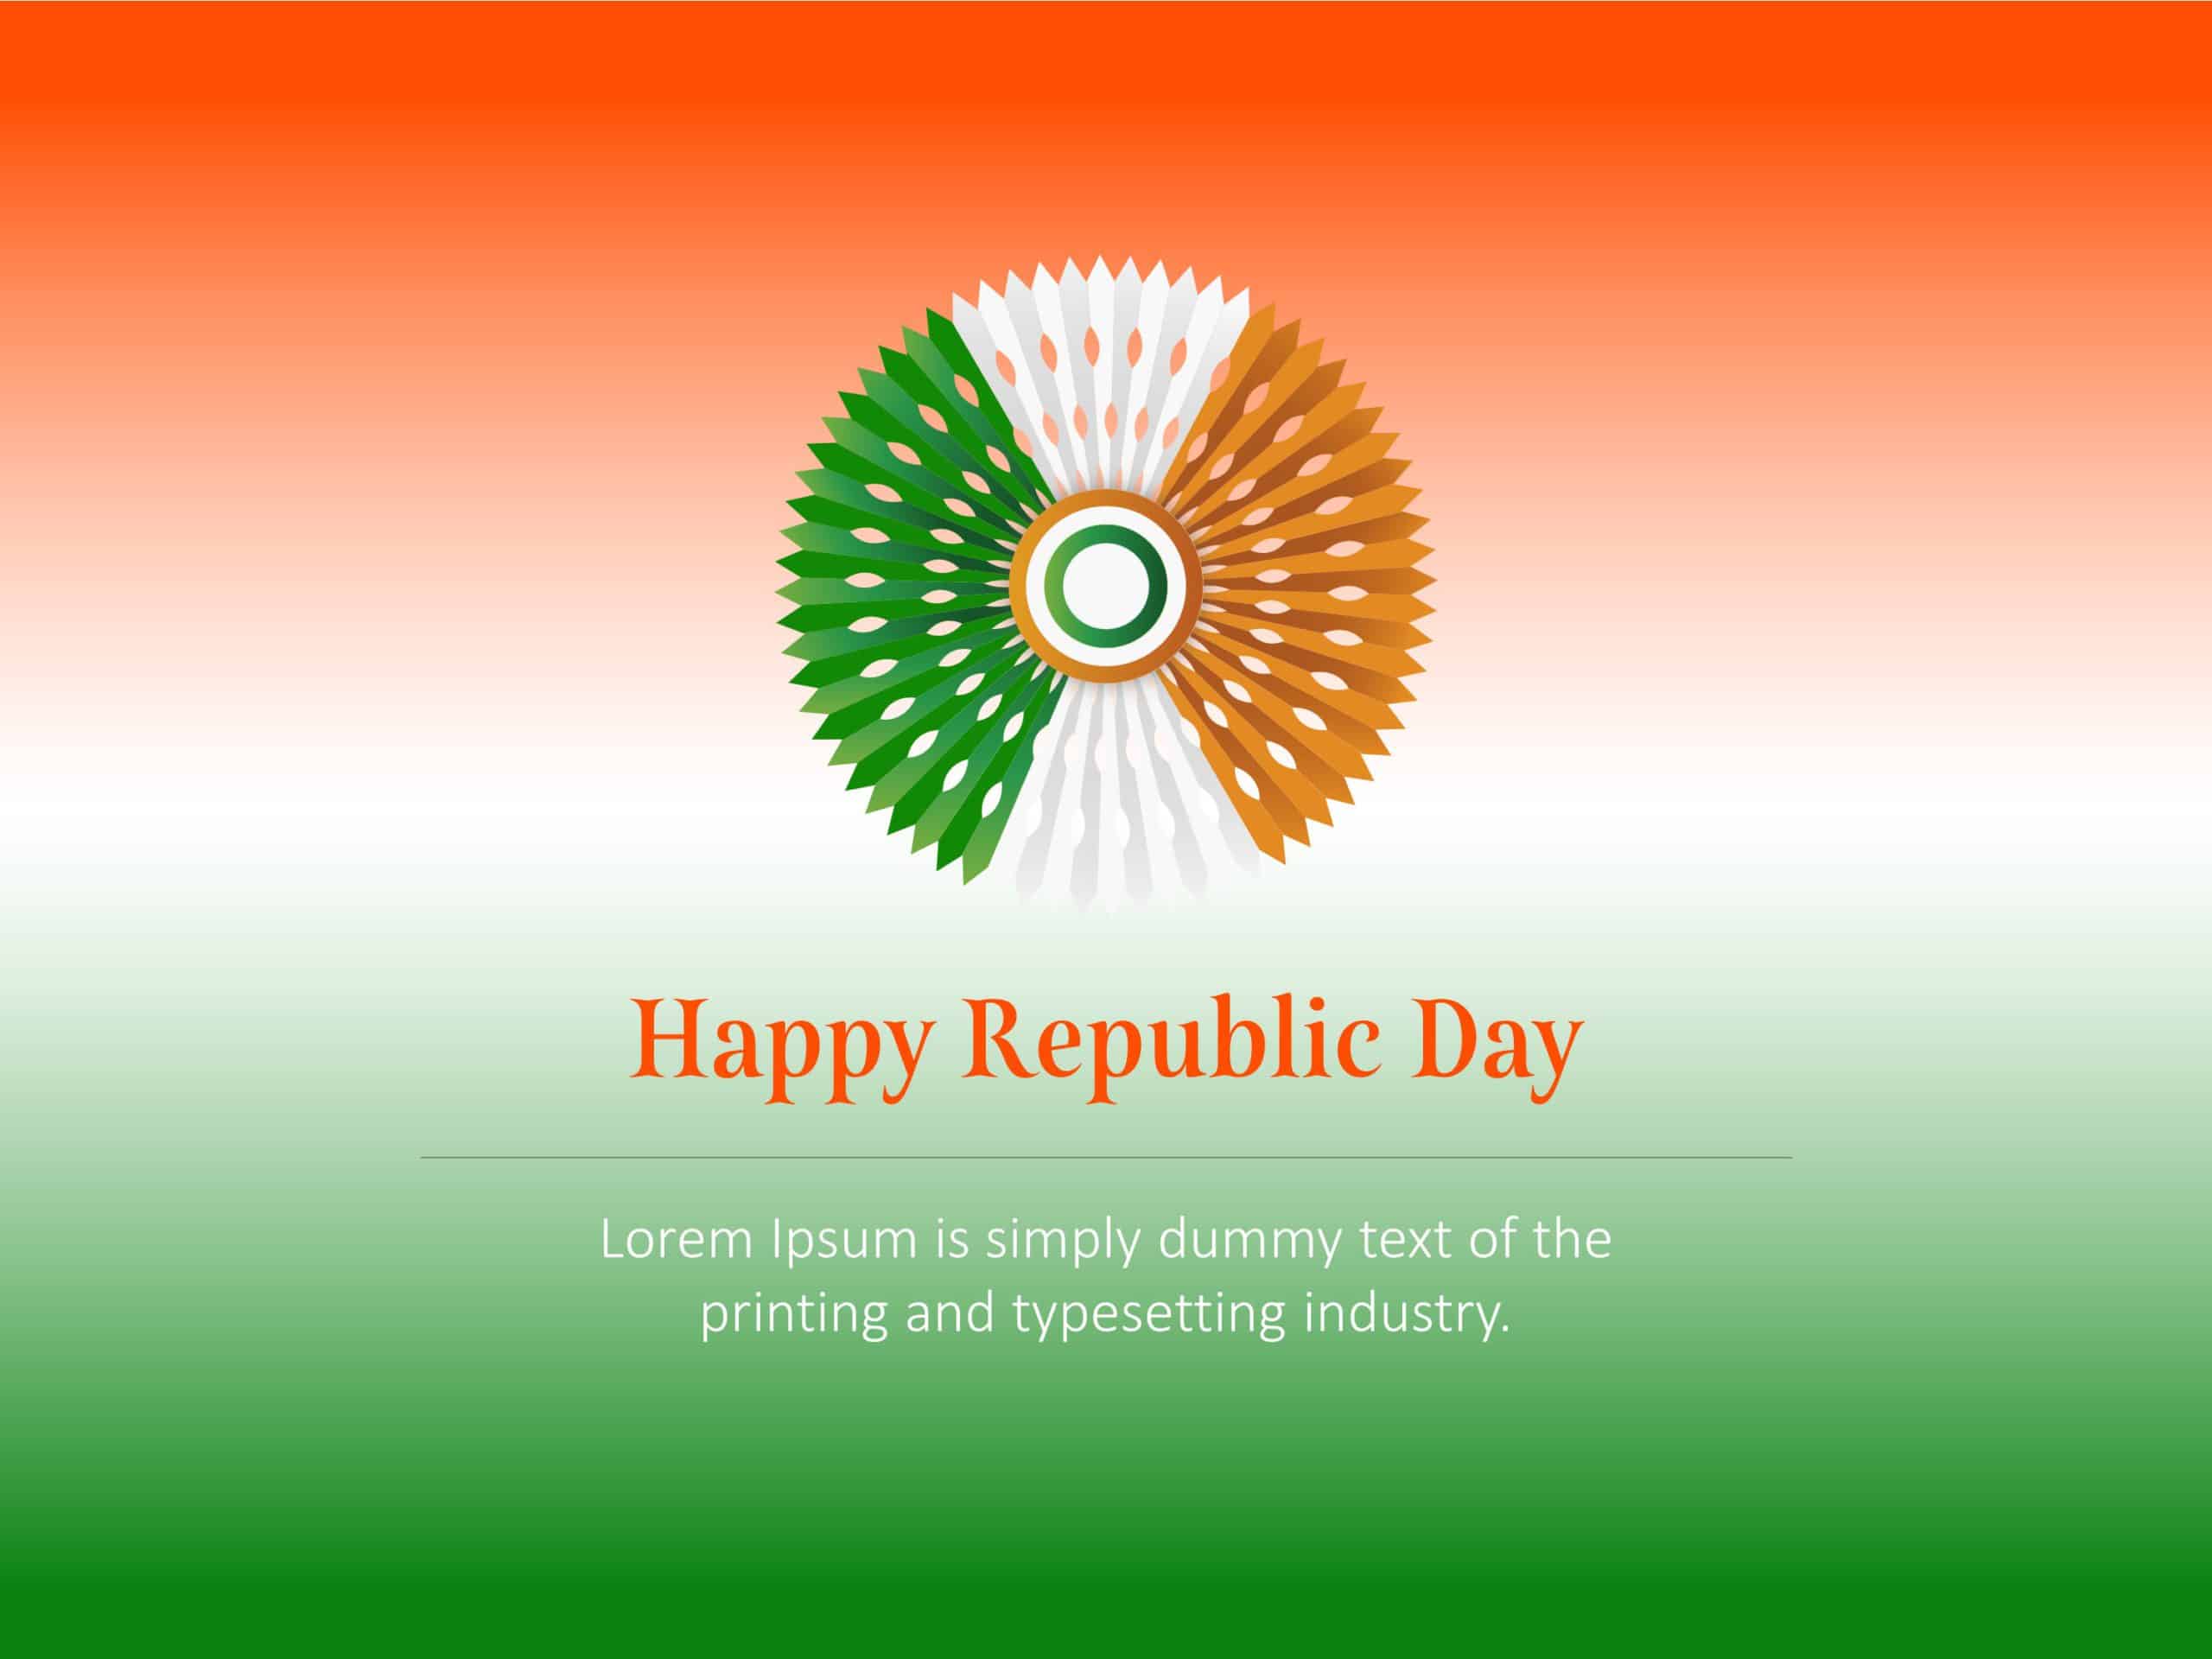 Animated Republic Day Cover Slide